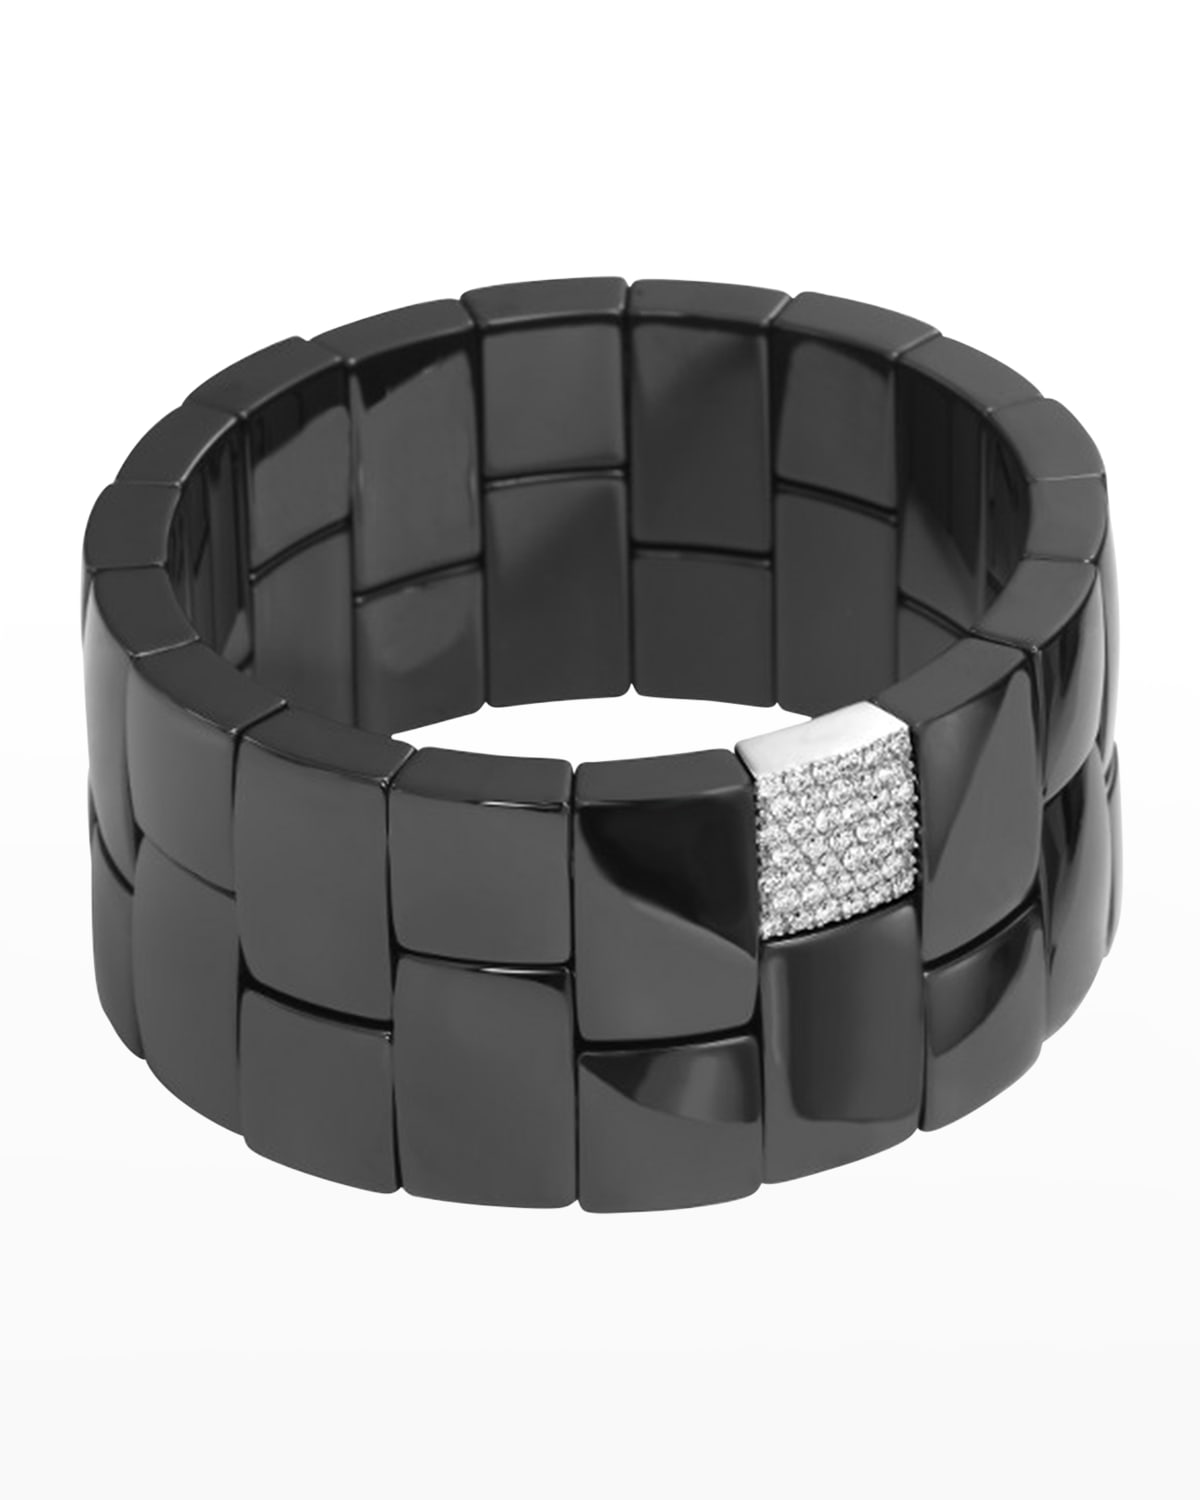 White Gold and Black Ceramic Domino 2-Row Stretch Bracelet with One Diamond Section